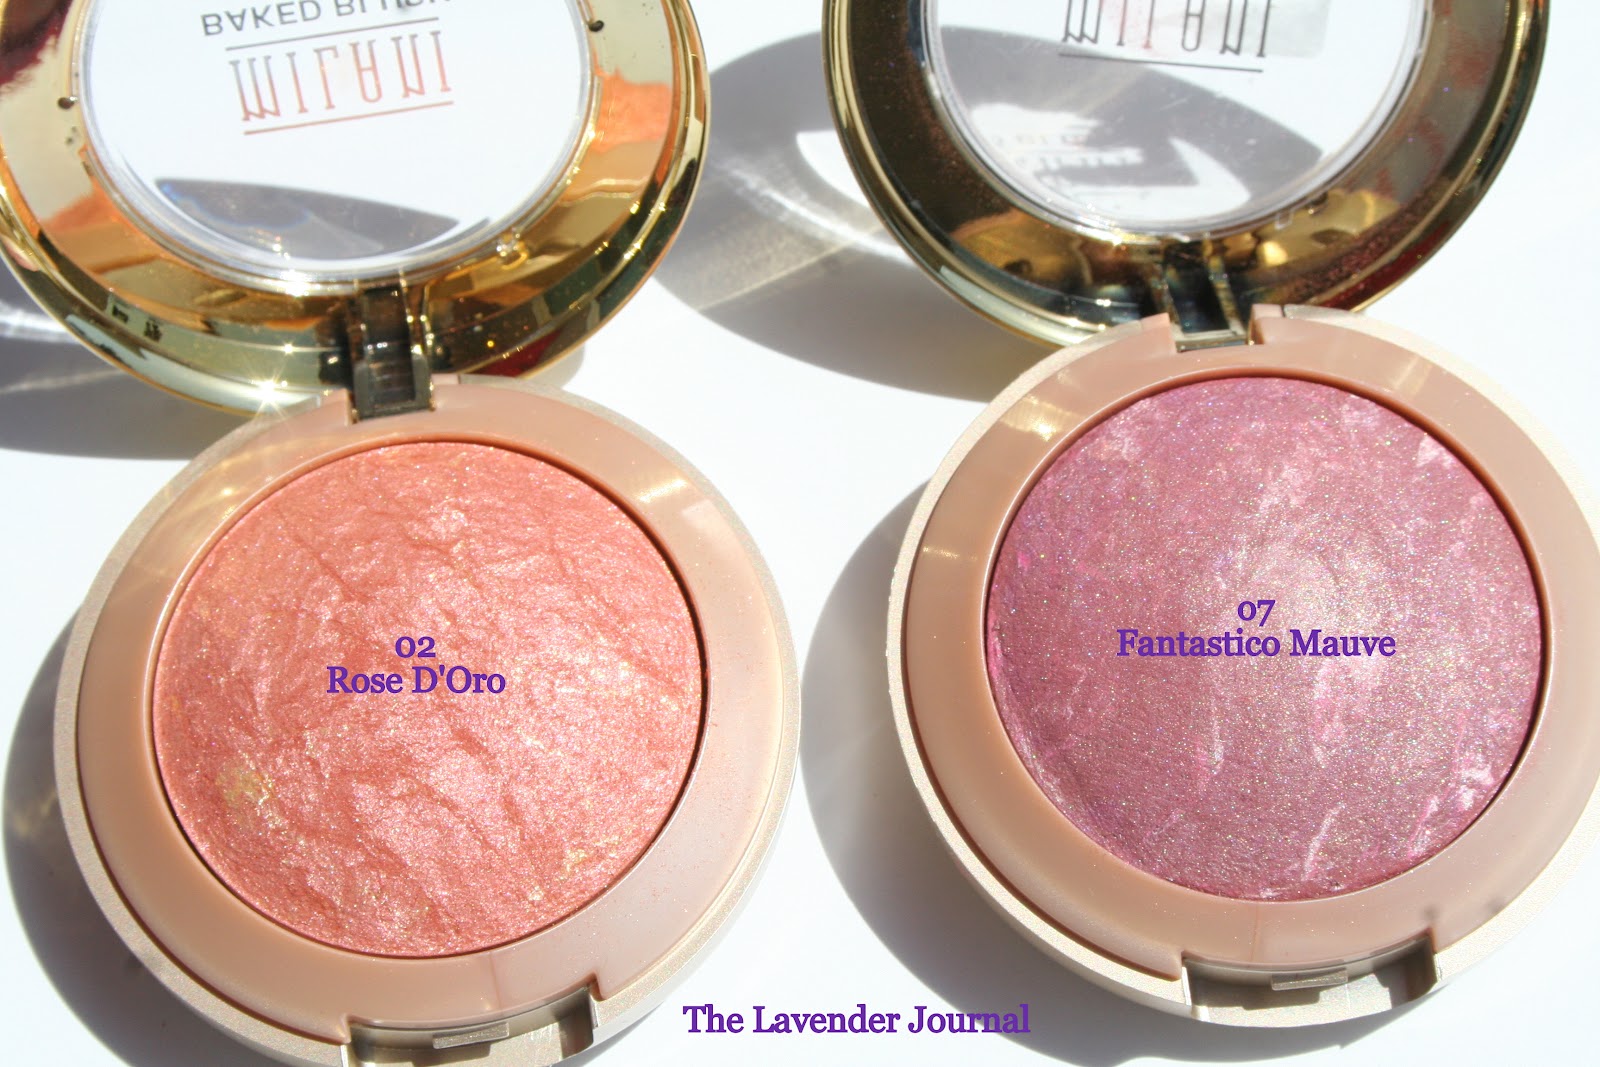 The Lavender Journal: Milani Baked Blushes :: 02 Rose D'Oro && 07 ...